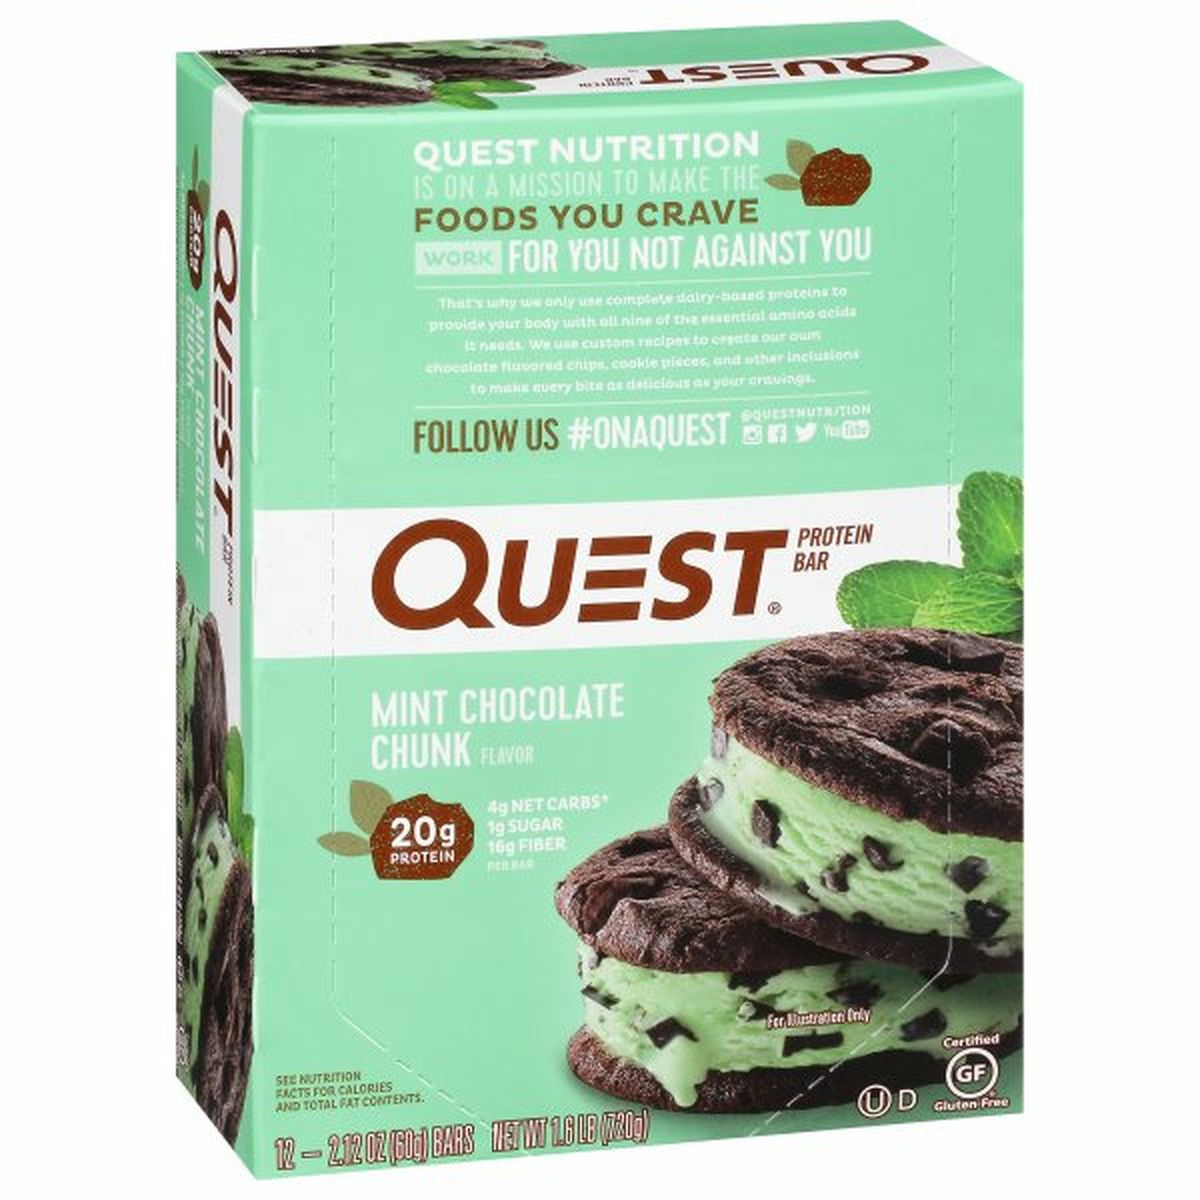 Calories in Quest Protein Bar, Milk Chocolate Chunk Flavor, 12 Pack